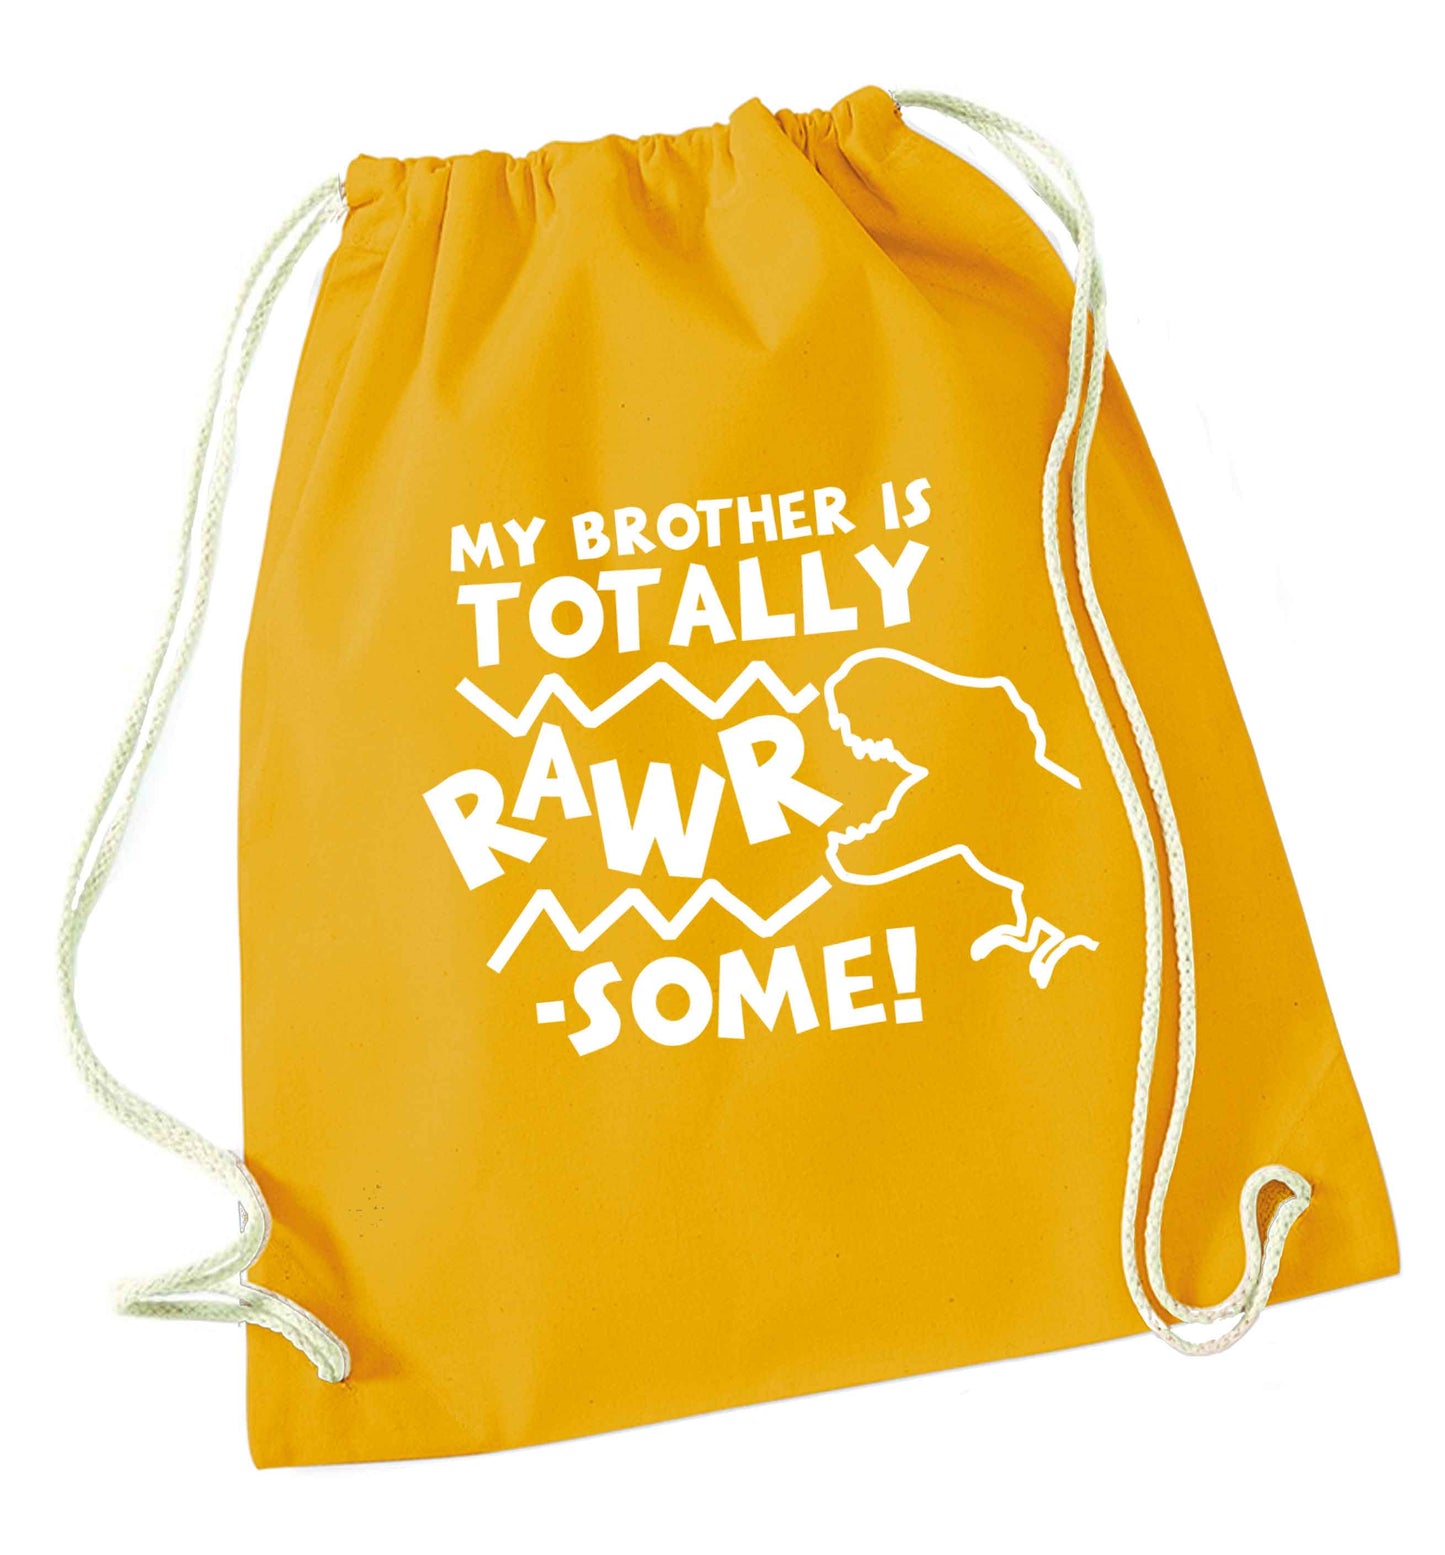 My brother is totally rawrsome mustard drawstring bag